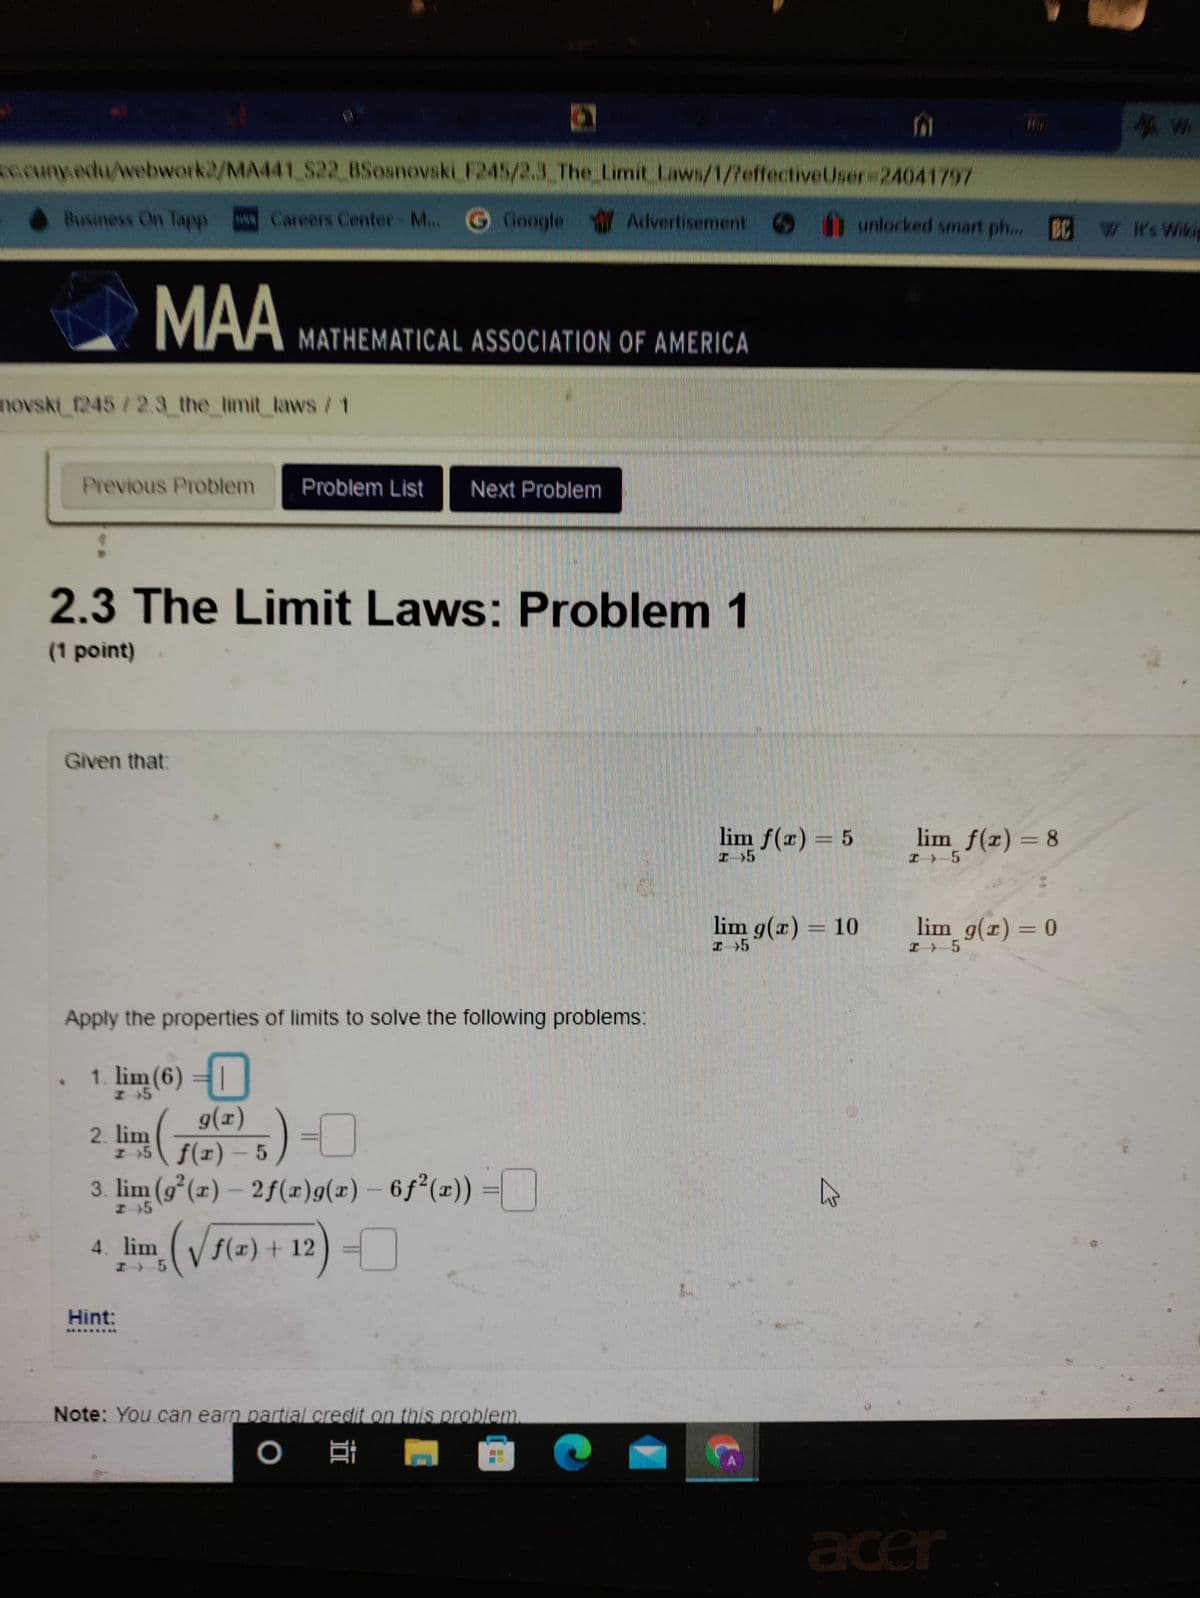 ncuny.edu/webwork2/MA441 S22 BSosnovski F245/2.3 The Limit Laws/1/7effectiveUser 24041797
Business On Tapp
HR Careers Center M...
Google Advertisement
unlocked smart ph... BC W W's Wikie
MAA
MATHEMATICAL ASSOCIATION OF AMERICA
novski_1245/2.3 the limit laws /1
Previous Problem
Problem List
Next Problem
2.3 The Limit Laws: Problem 1
(1 point)
Given that:
lim f(x) = 5
lim f(z) = 8
lim g(x) = 10
lim g(x) = 0
Apply the properties of limits to solve the following problems:
1. lim (6) =|
g(x)
2. lim
I 5 f(x) – 5
3. lim (g°(x) – 2f(x)g(x) – 6ƒ²(x))
H+5
lim (Vs(2) + 12) =
f(x)+ 12
Hint:
Note: You can earn partial credit on this problem
耳
acer
